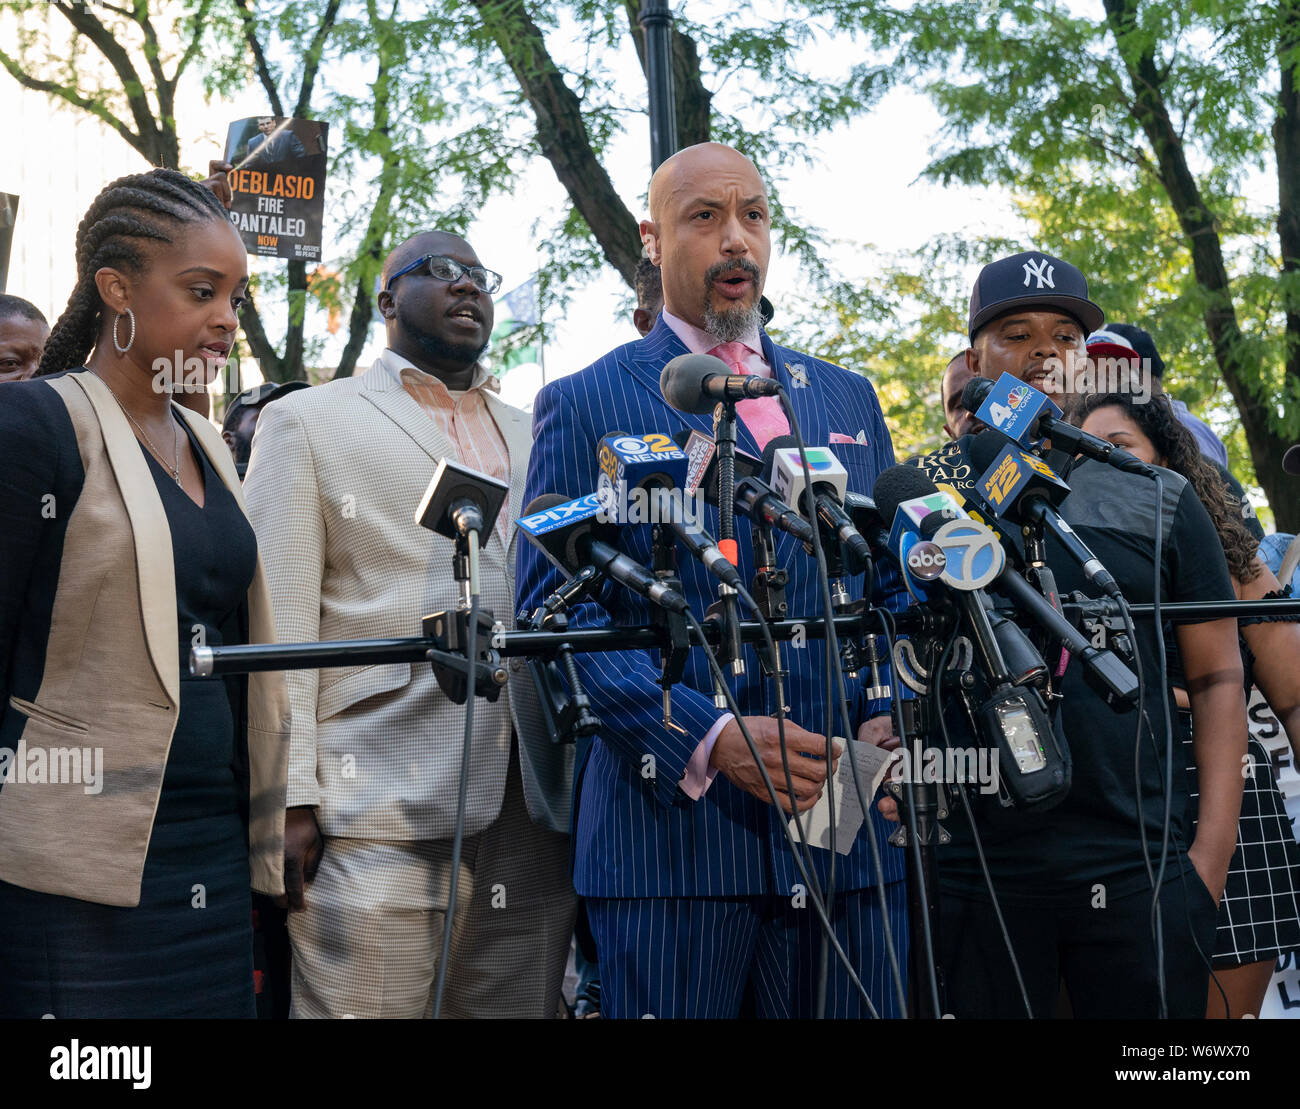 New York, United States. 02nd Aug, 2019. Elder Kirsten speaks at rally and press conference to demand firing police officer Daniel Pantaleo accused of using banned chokehold on Eric Garner at 1 Police Plaza Credit: Lev Radin/Pacific Press/Alamy Live News Stock Photo